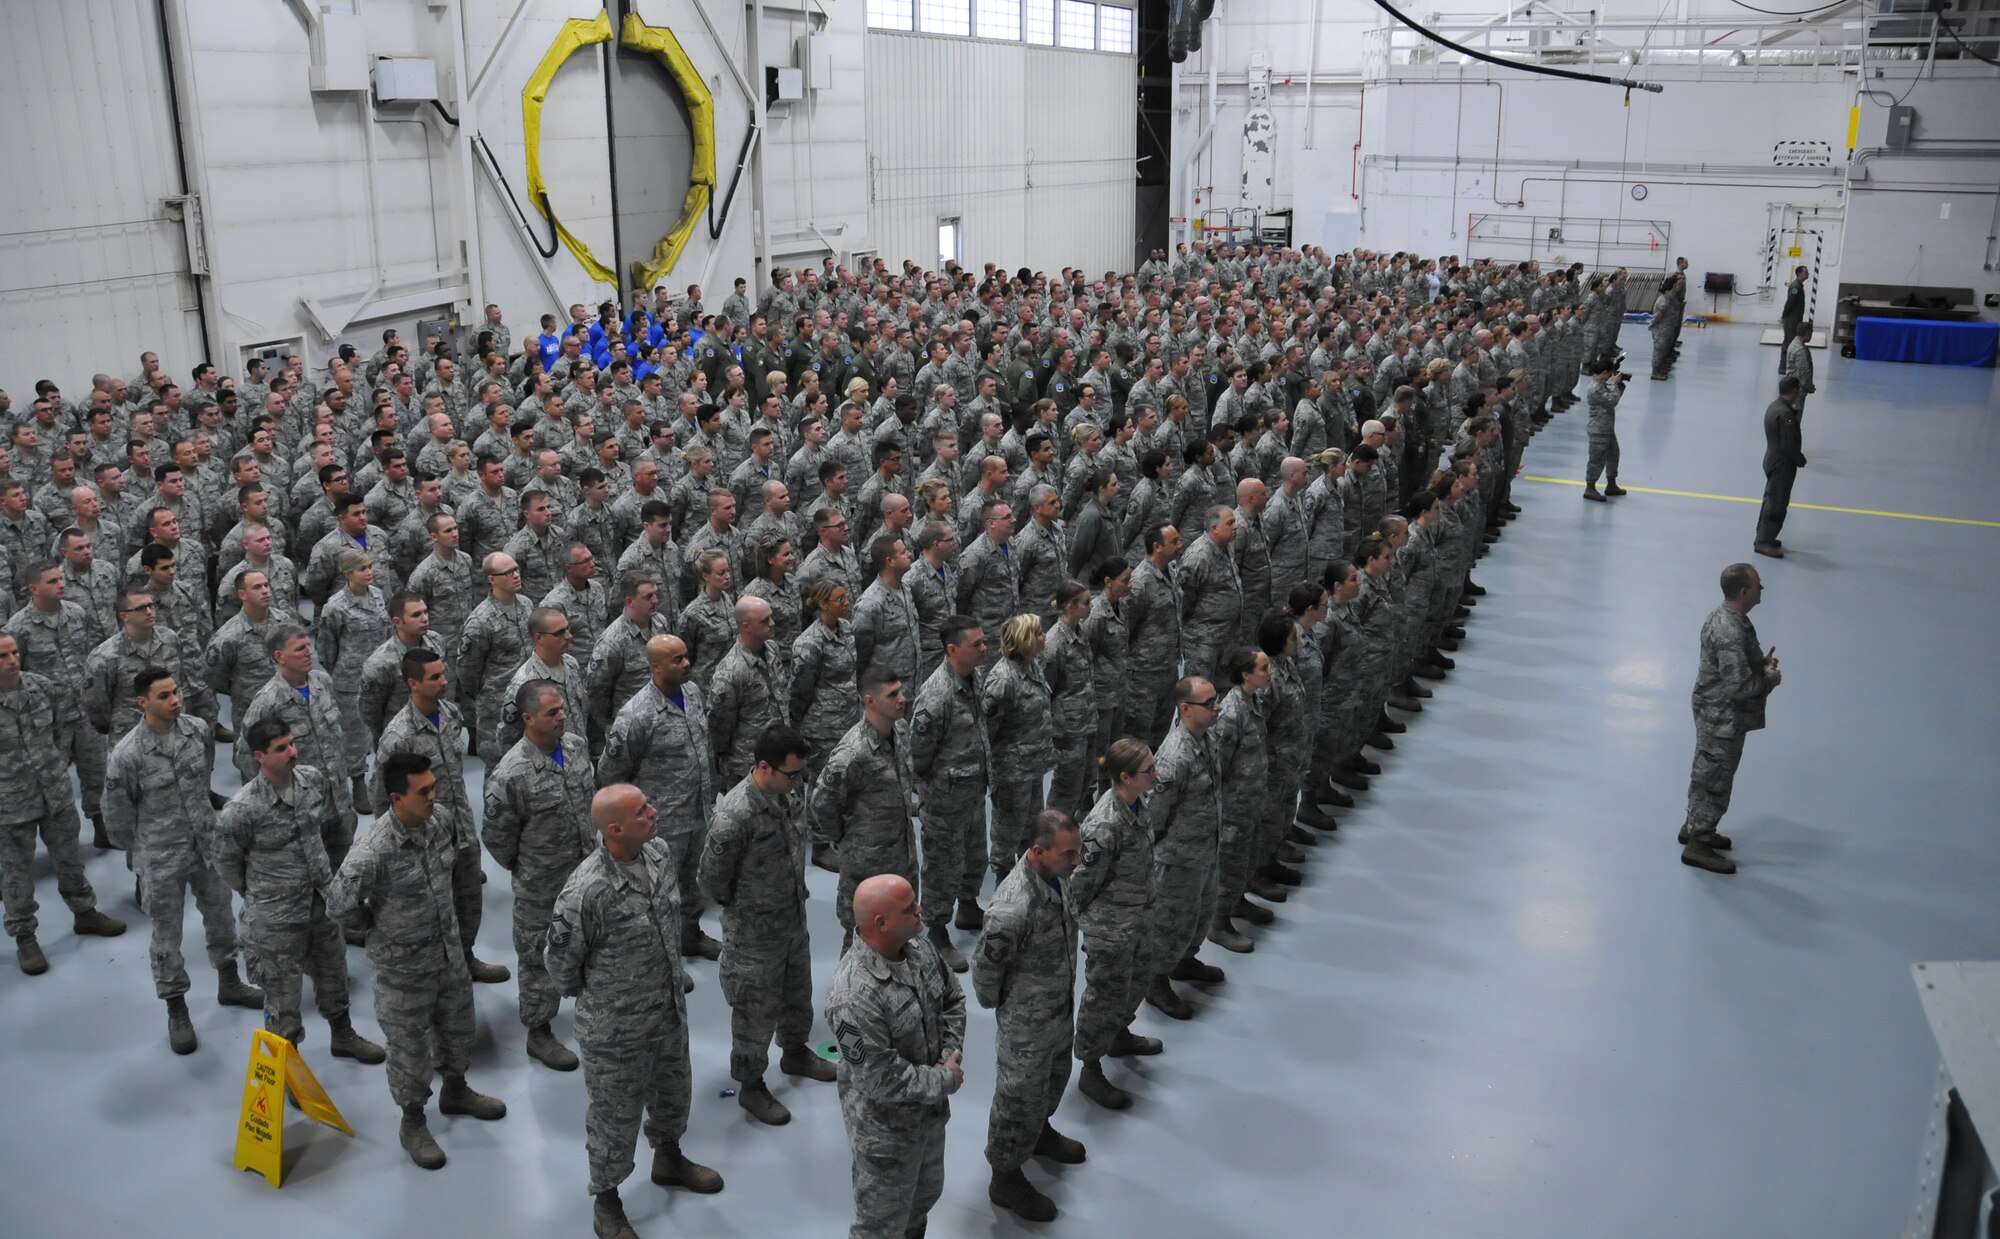 Airmen of the 128th Air Refueling Wing stand at attention as Major General Donald P. Dunbar, Adjutant General of the Wisconsin National Guard, presents the Air Force Outstanding Unit Award to Col. Daniel Yenchesky, commander of the 128 ARW in a formal ceremony Oct. 2, 2016 at General Mitchell Airfield, Milwaukee. This award marks the seventh time the 128 ARW has received the AFOUA and covers the period of Oct. 1, 2014 through Sept. 30, 2015.  (Air National Guard photo by Senior Airman Morgan R. Lipinski, 128 ARW Public Affairs/Released)